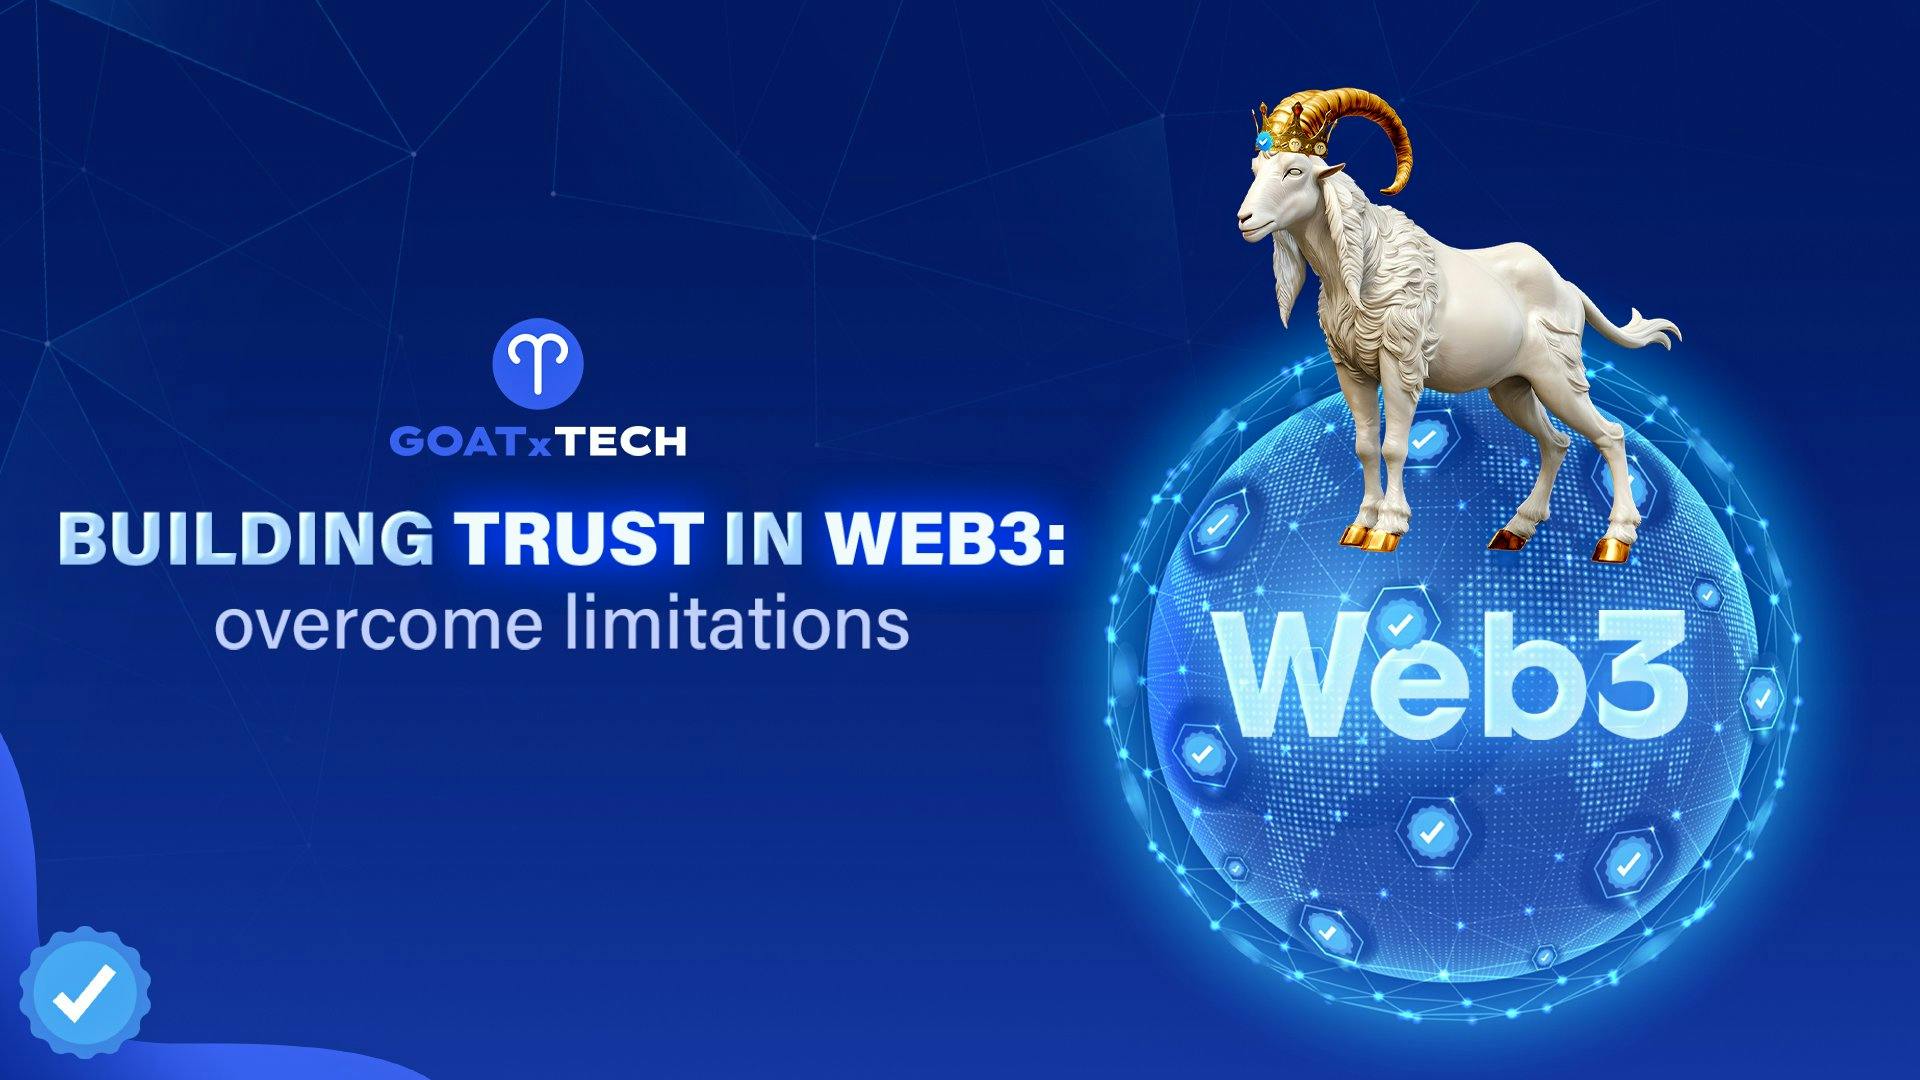 Goat.Tech aims to overcome limitations of existing Trust Score systems to build Trust in Web3